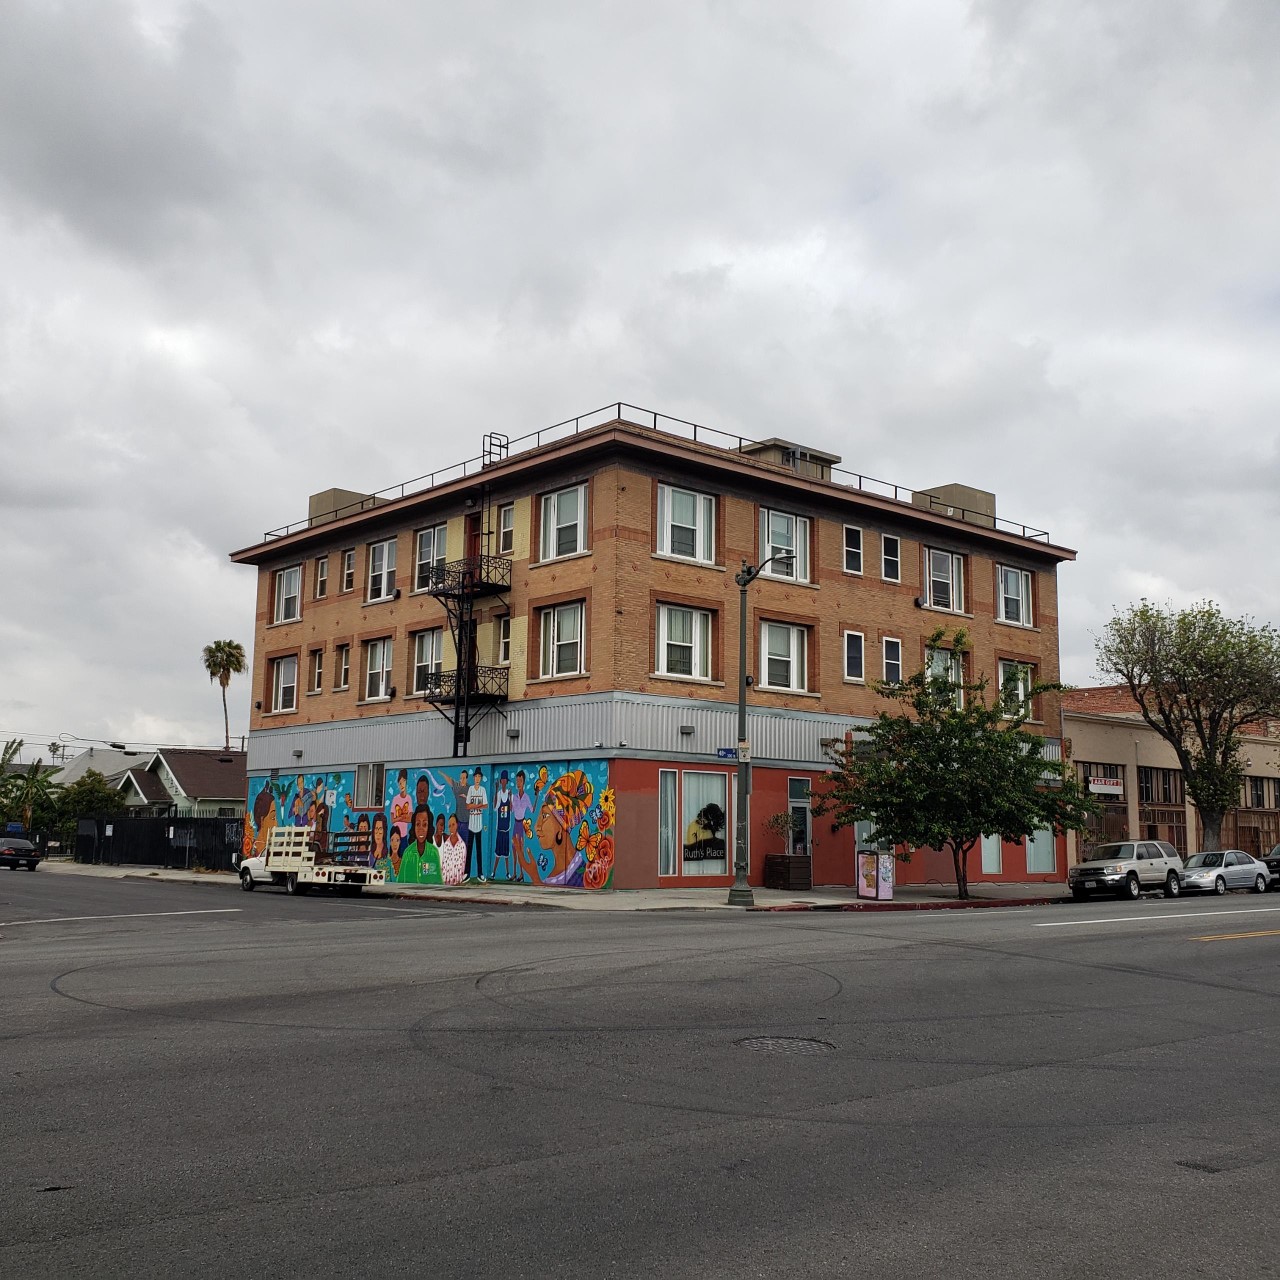 Corner street view of three story brick building with mural along one side of building.